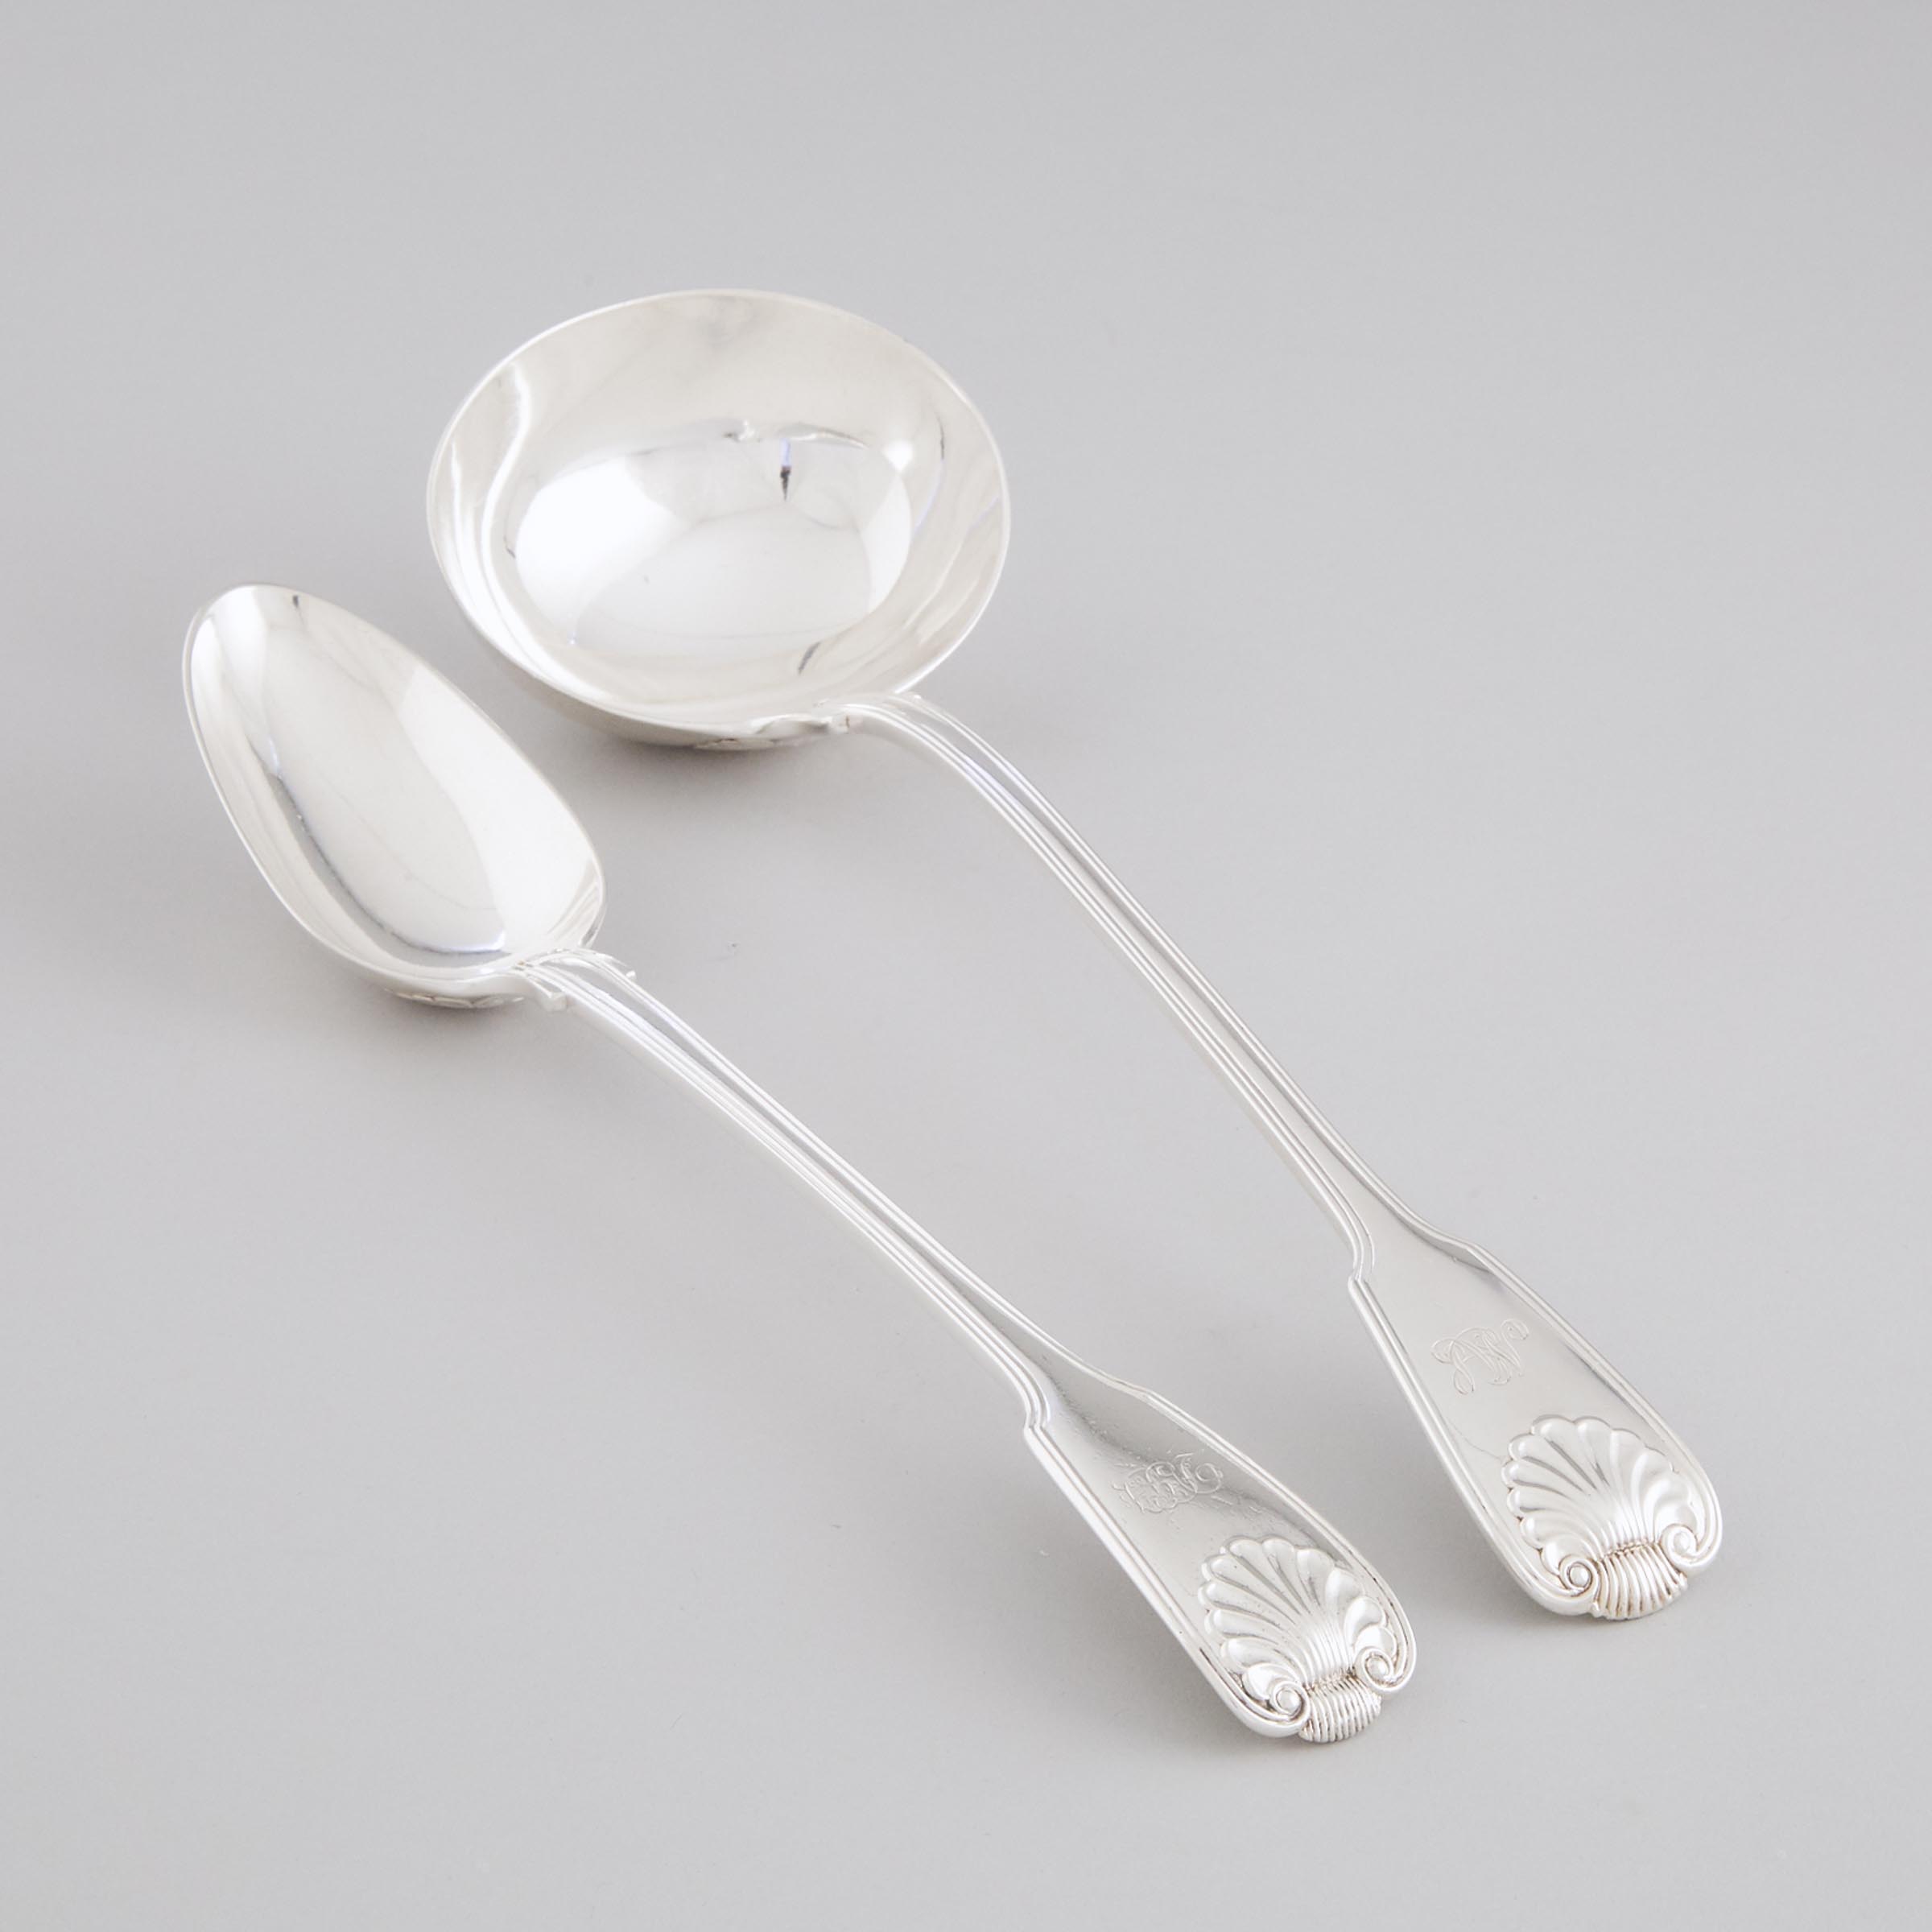 Victorian Silver Fiddle, Thread and Shell Pattern Serving Spoon and Soup Ladle, George Adams, London, 1841/63